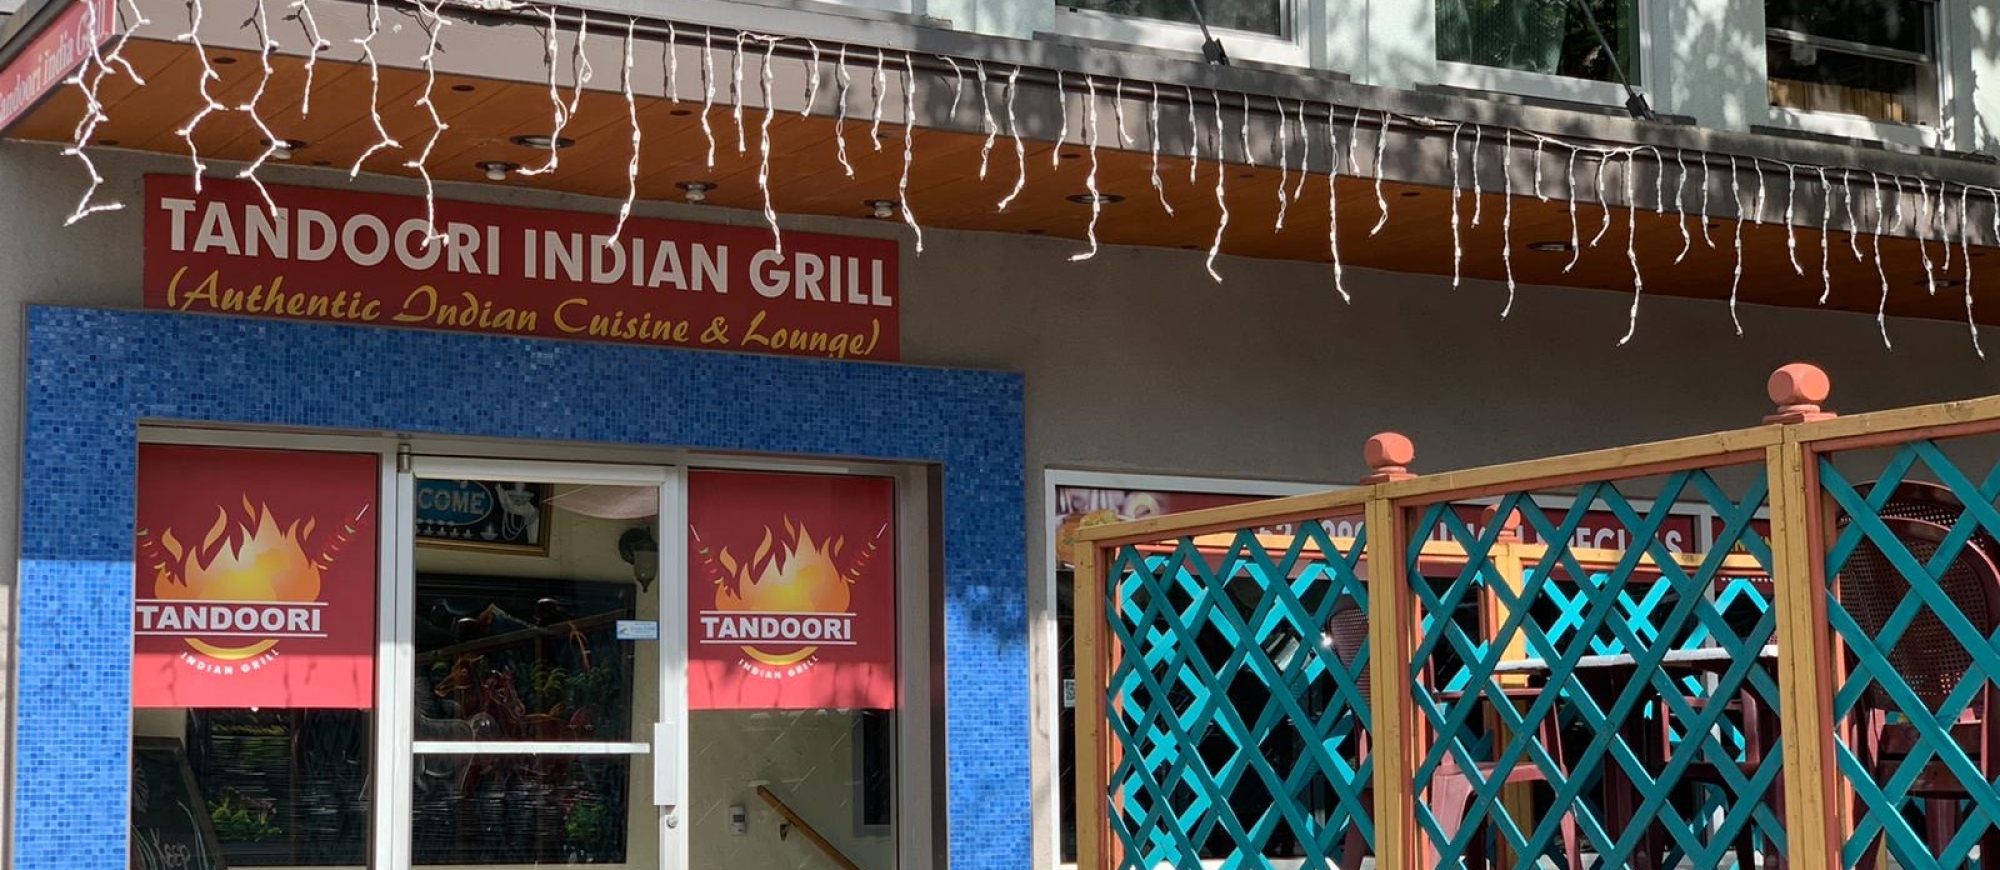 the tandoori grill building with lights hanging down and a green patio fence